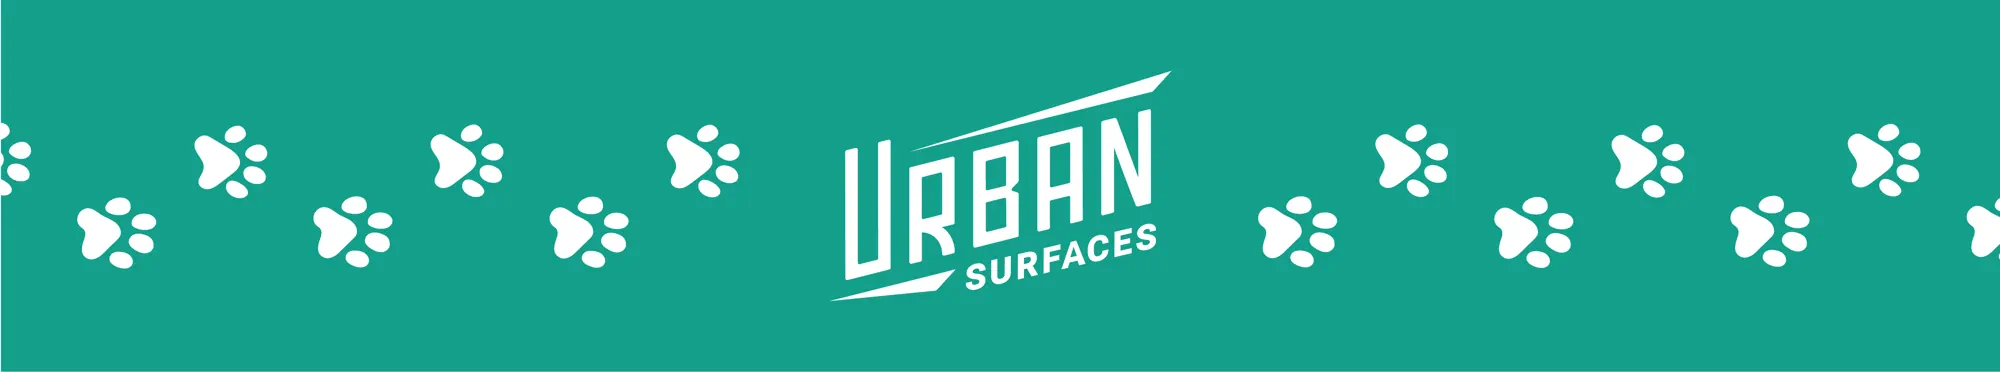 Urban Surfaces logo on a teal background with dog paw prints.